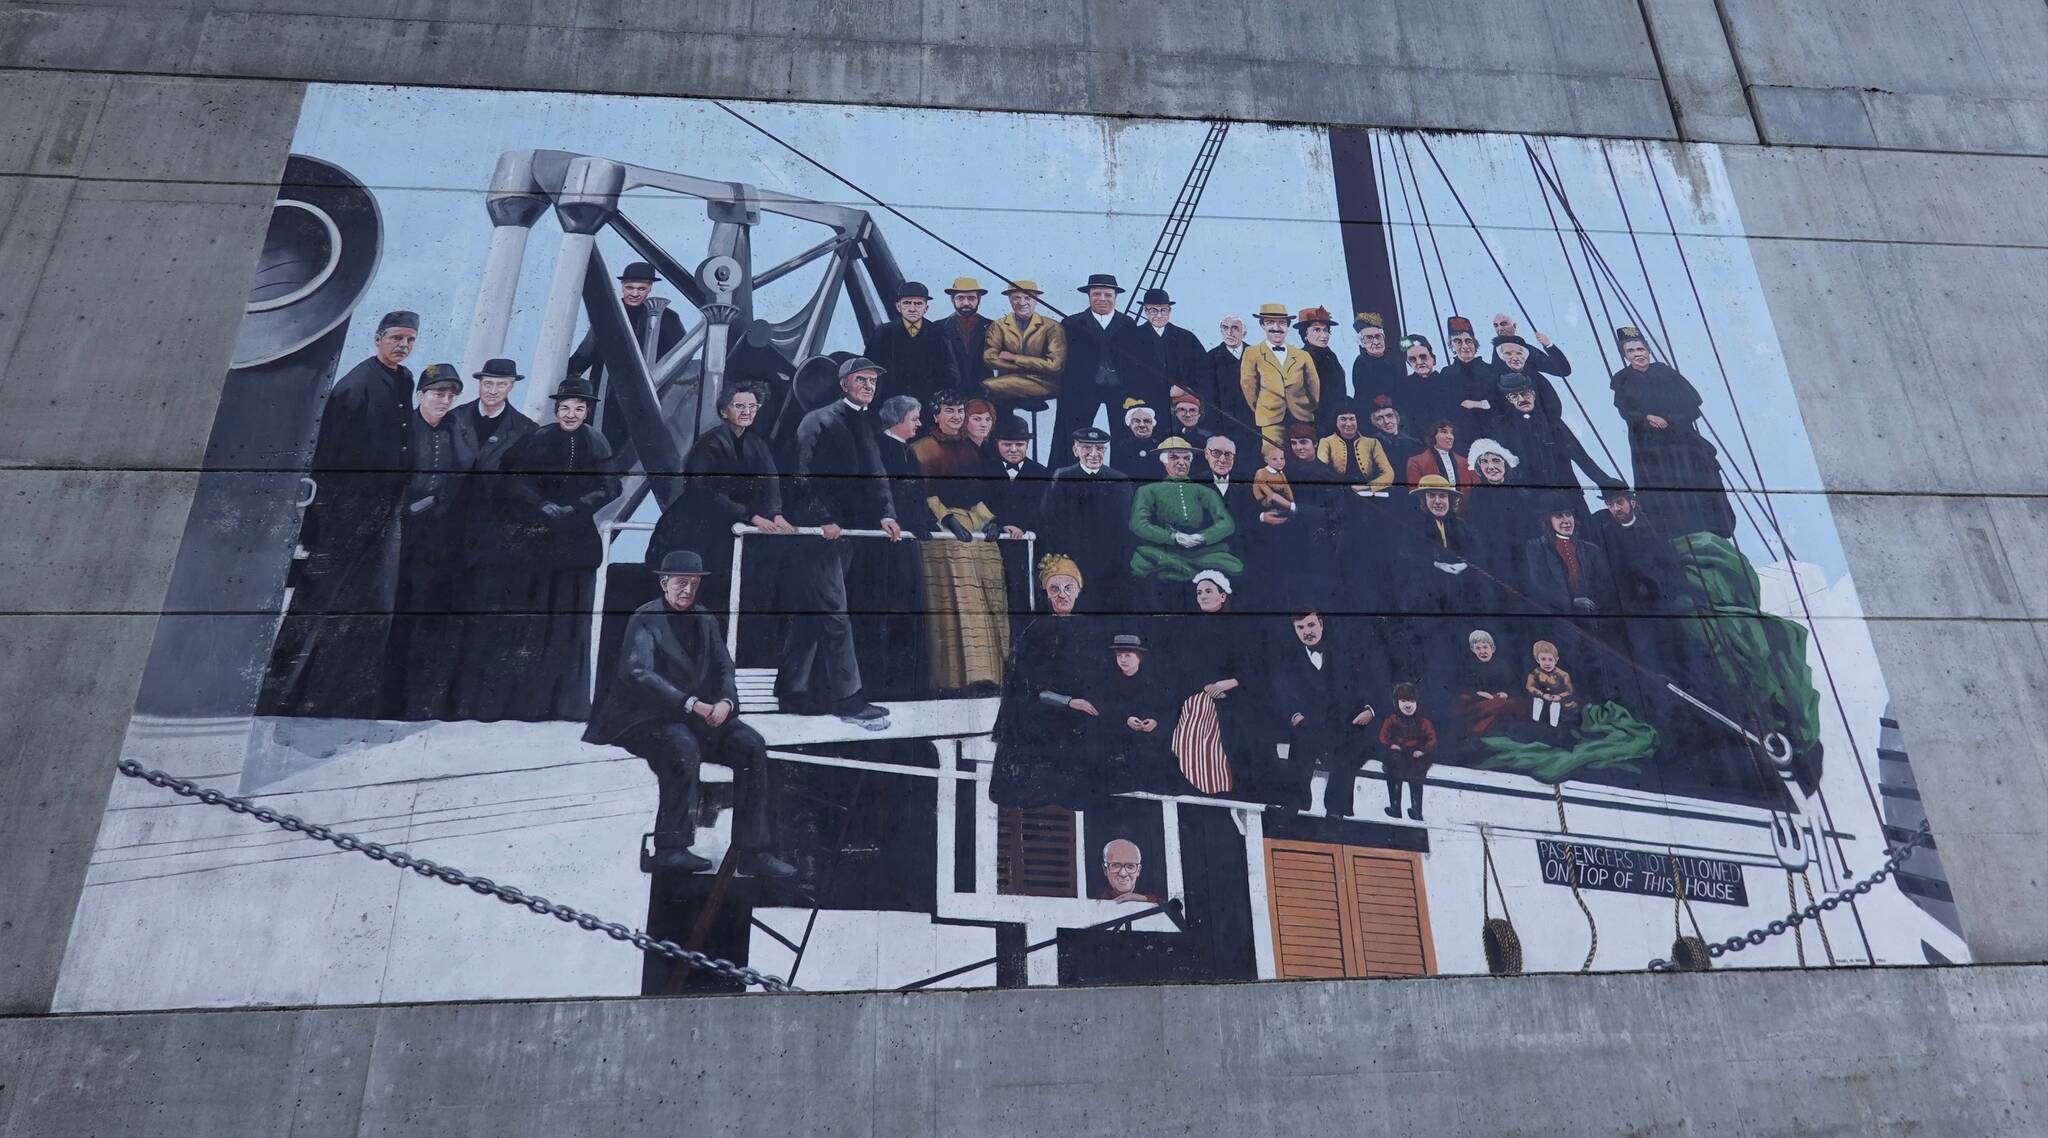 The 1986 mural “ANCON” is based on a historical photo of early steamship passengers, but features faces of 1980s living descendants of white pioneers. (Laurie Craig / For the Juneau Empire)